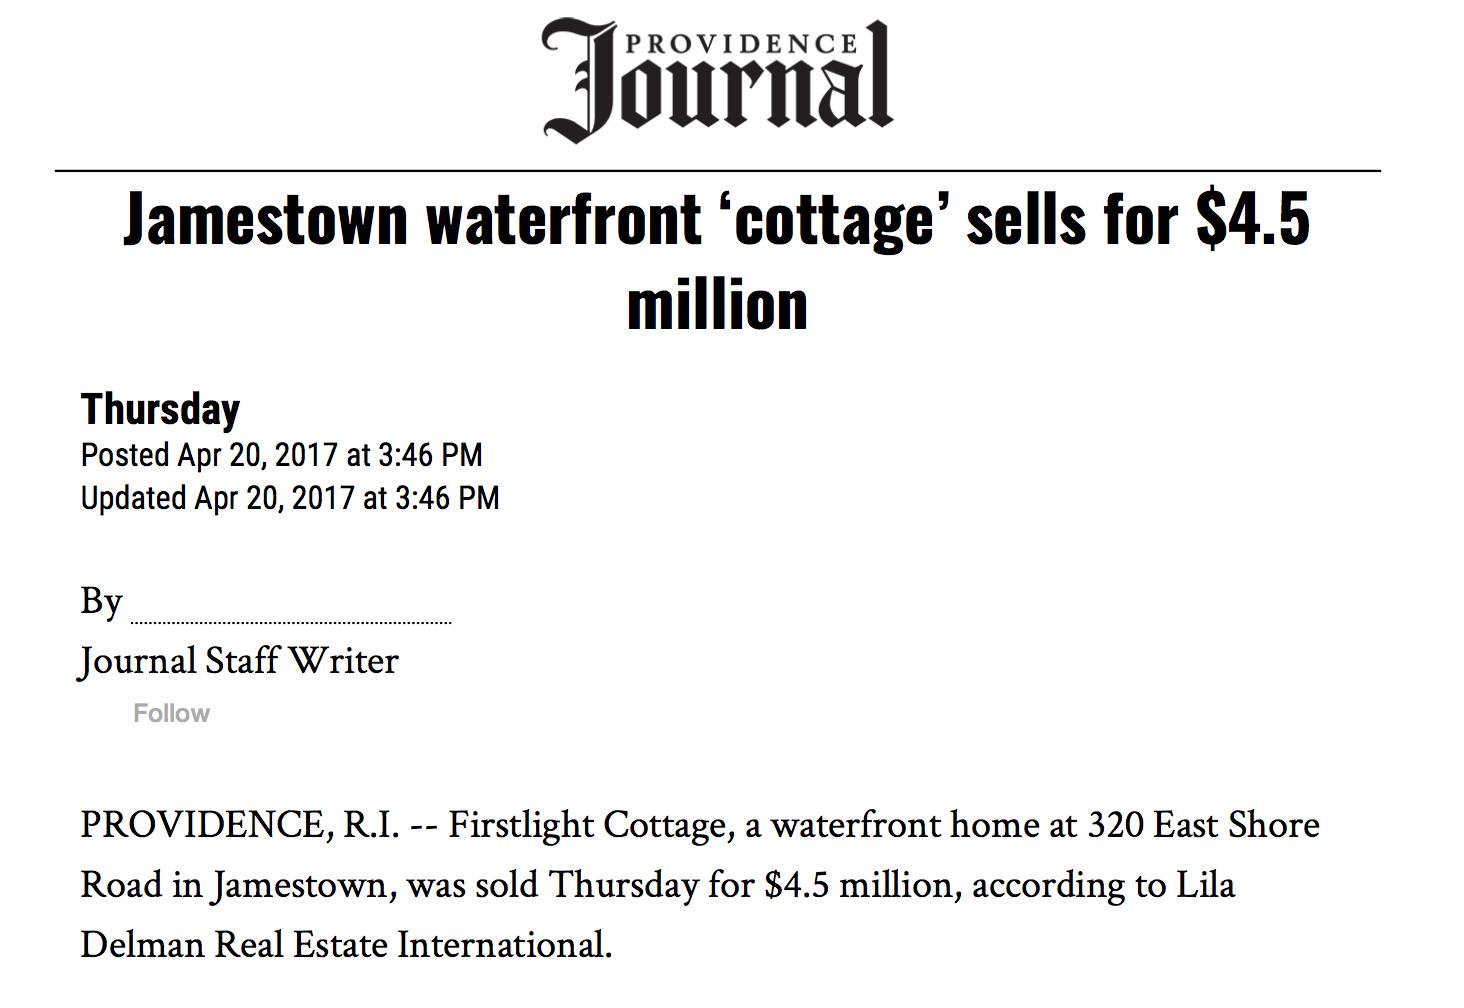 Firstlight Cottage Featured in the Providence Journal